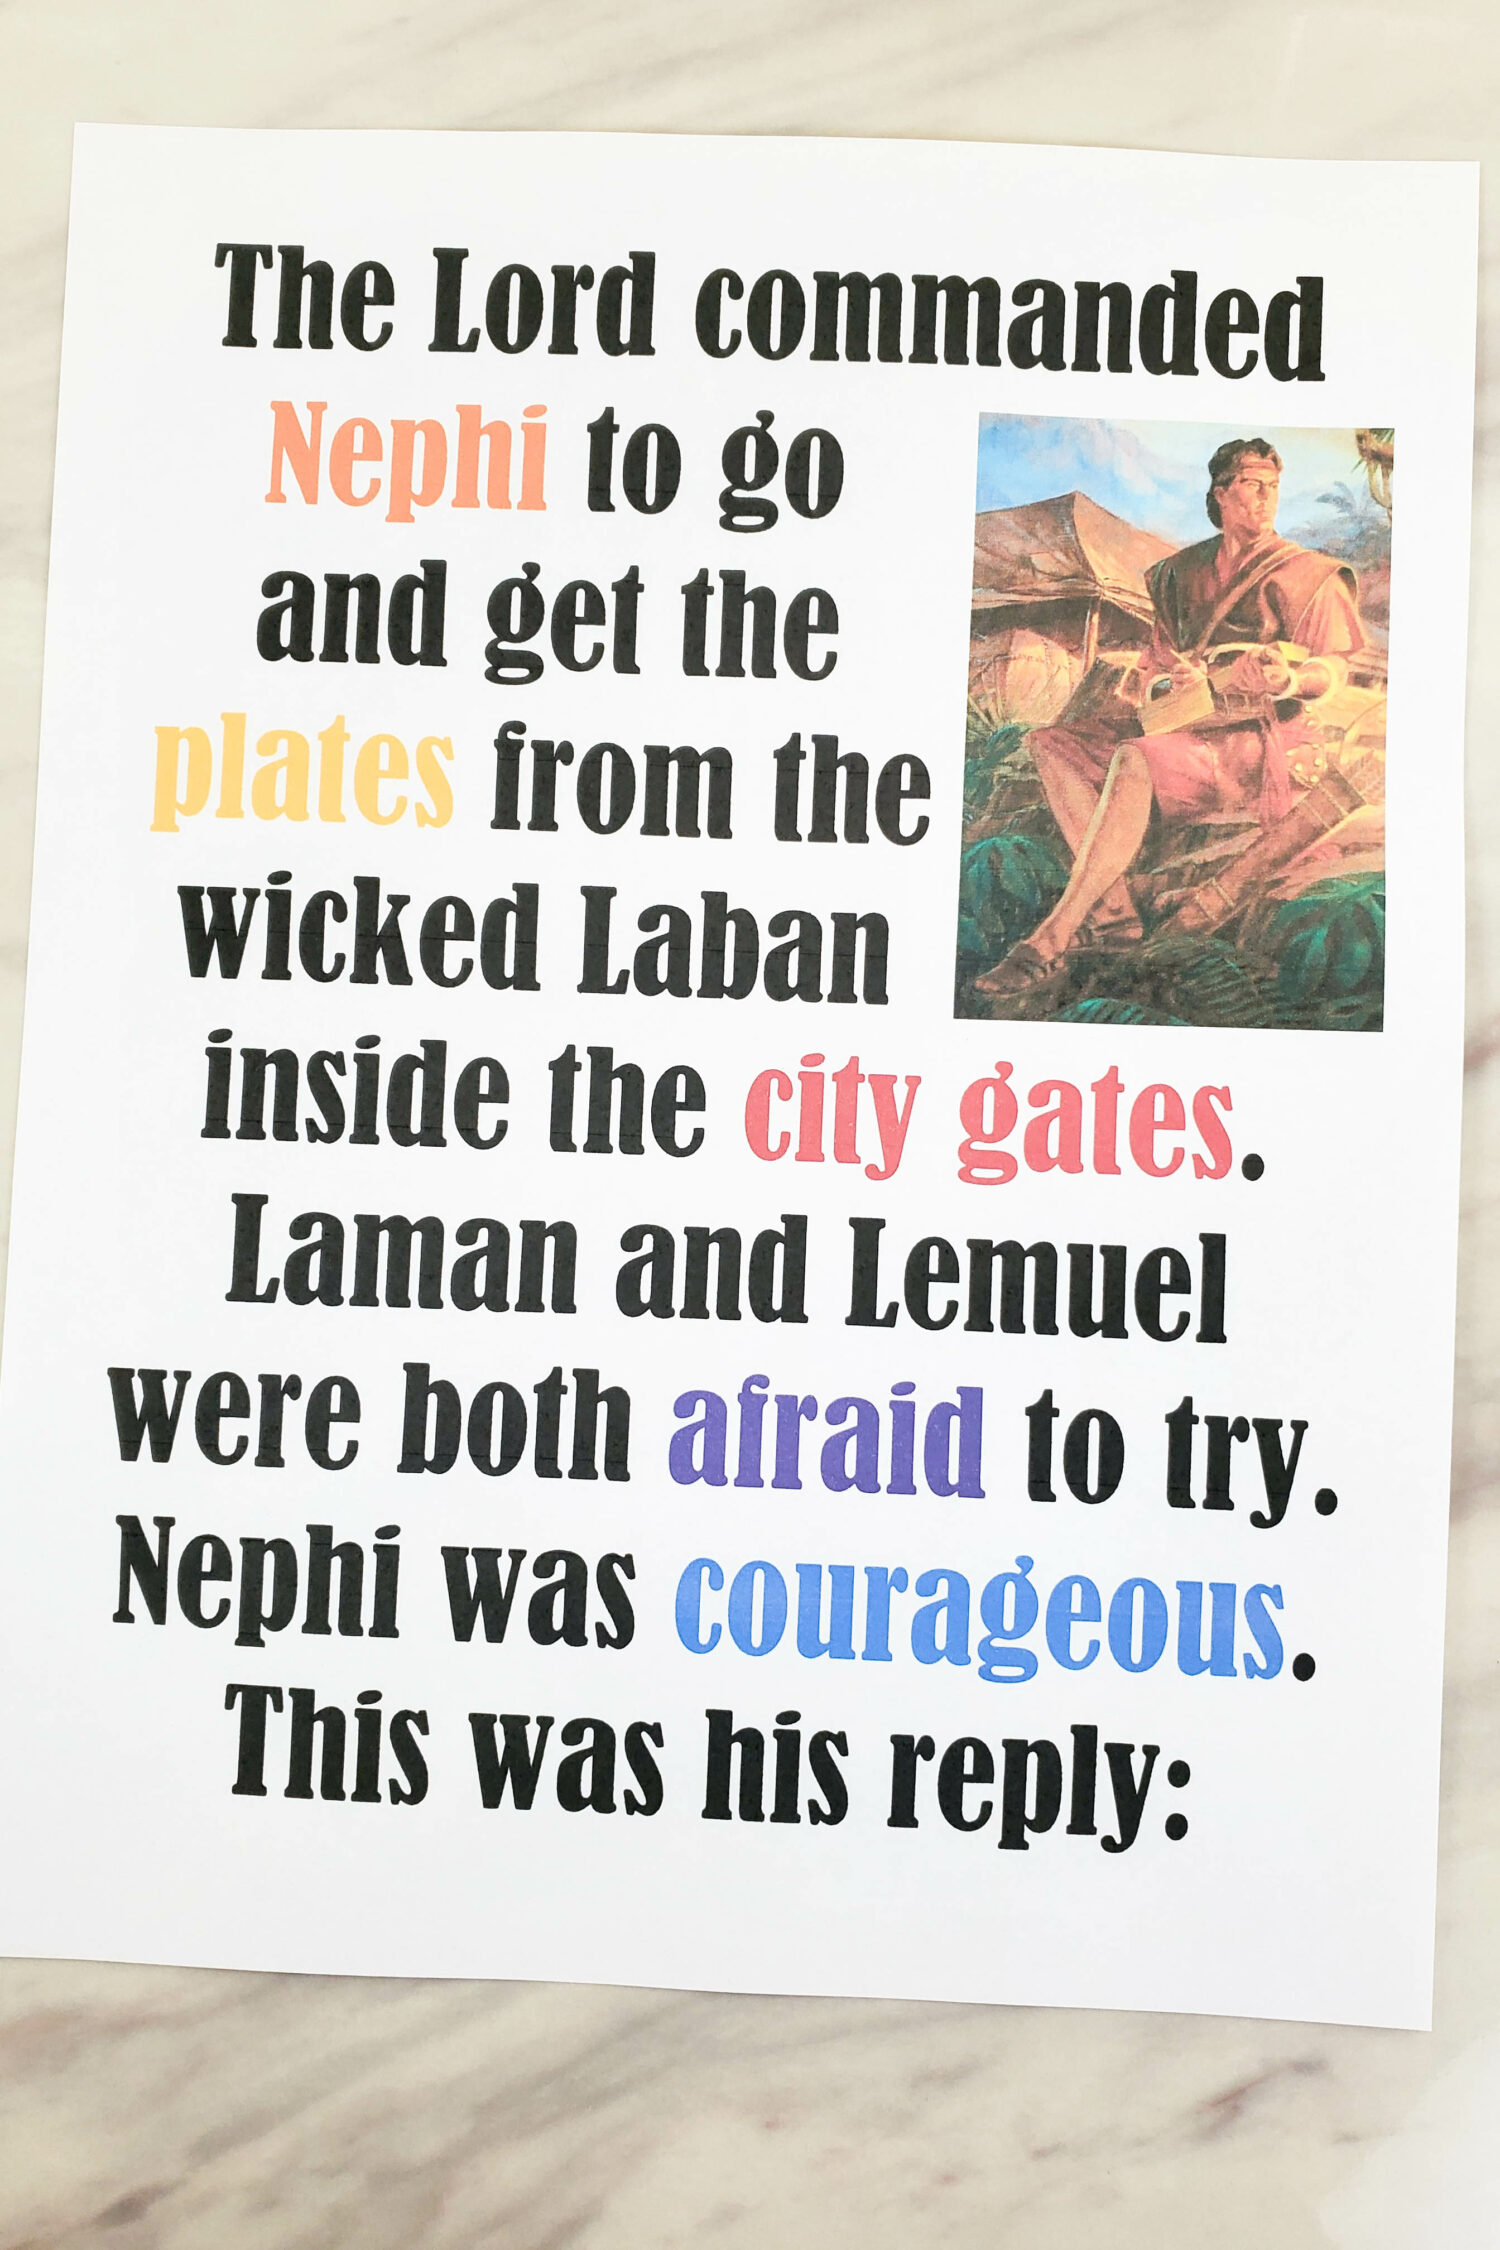 Nephi's Courage Flip Chart Teach this upbeat Primary song as part of your Book of Mormon Come Follow Me year. Find the lyrics and pictures plus words using photos from the church media library. Printable resource for LDS Primary Music leaders.